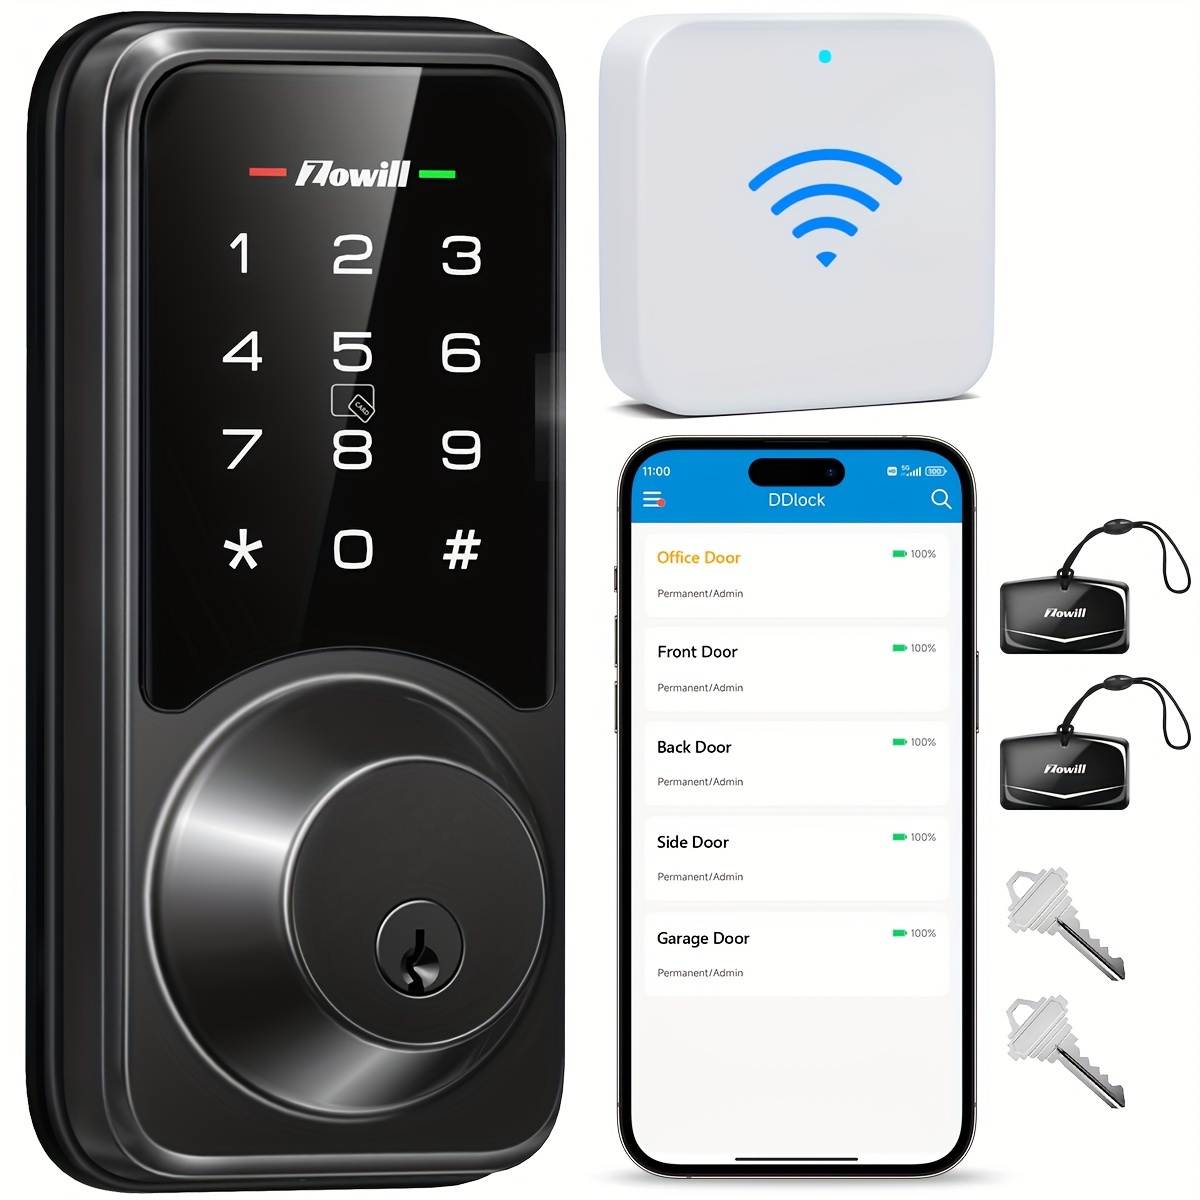 

Zowill Wifi App Control, Keyless Entry Door Lock With Remotely Control, Touchscreen Keypads, Auto Lock Smart Deadbolt For Front Door, Home, Airbnb (included G2 Gateway)